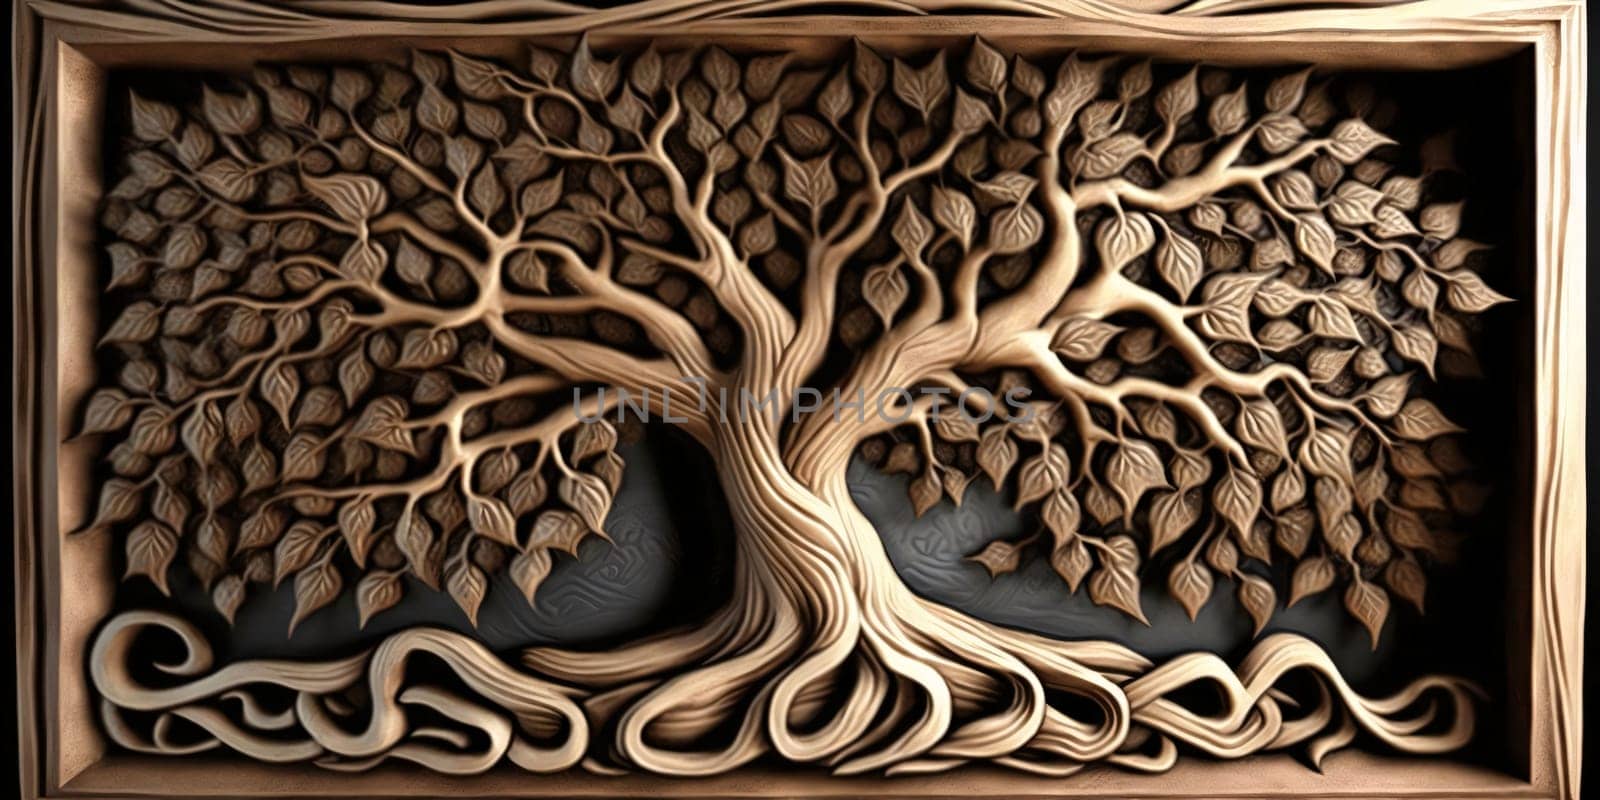 Banner: 3d illustration of abstract tree in wooden box over black background.